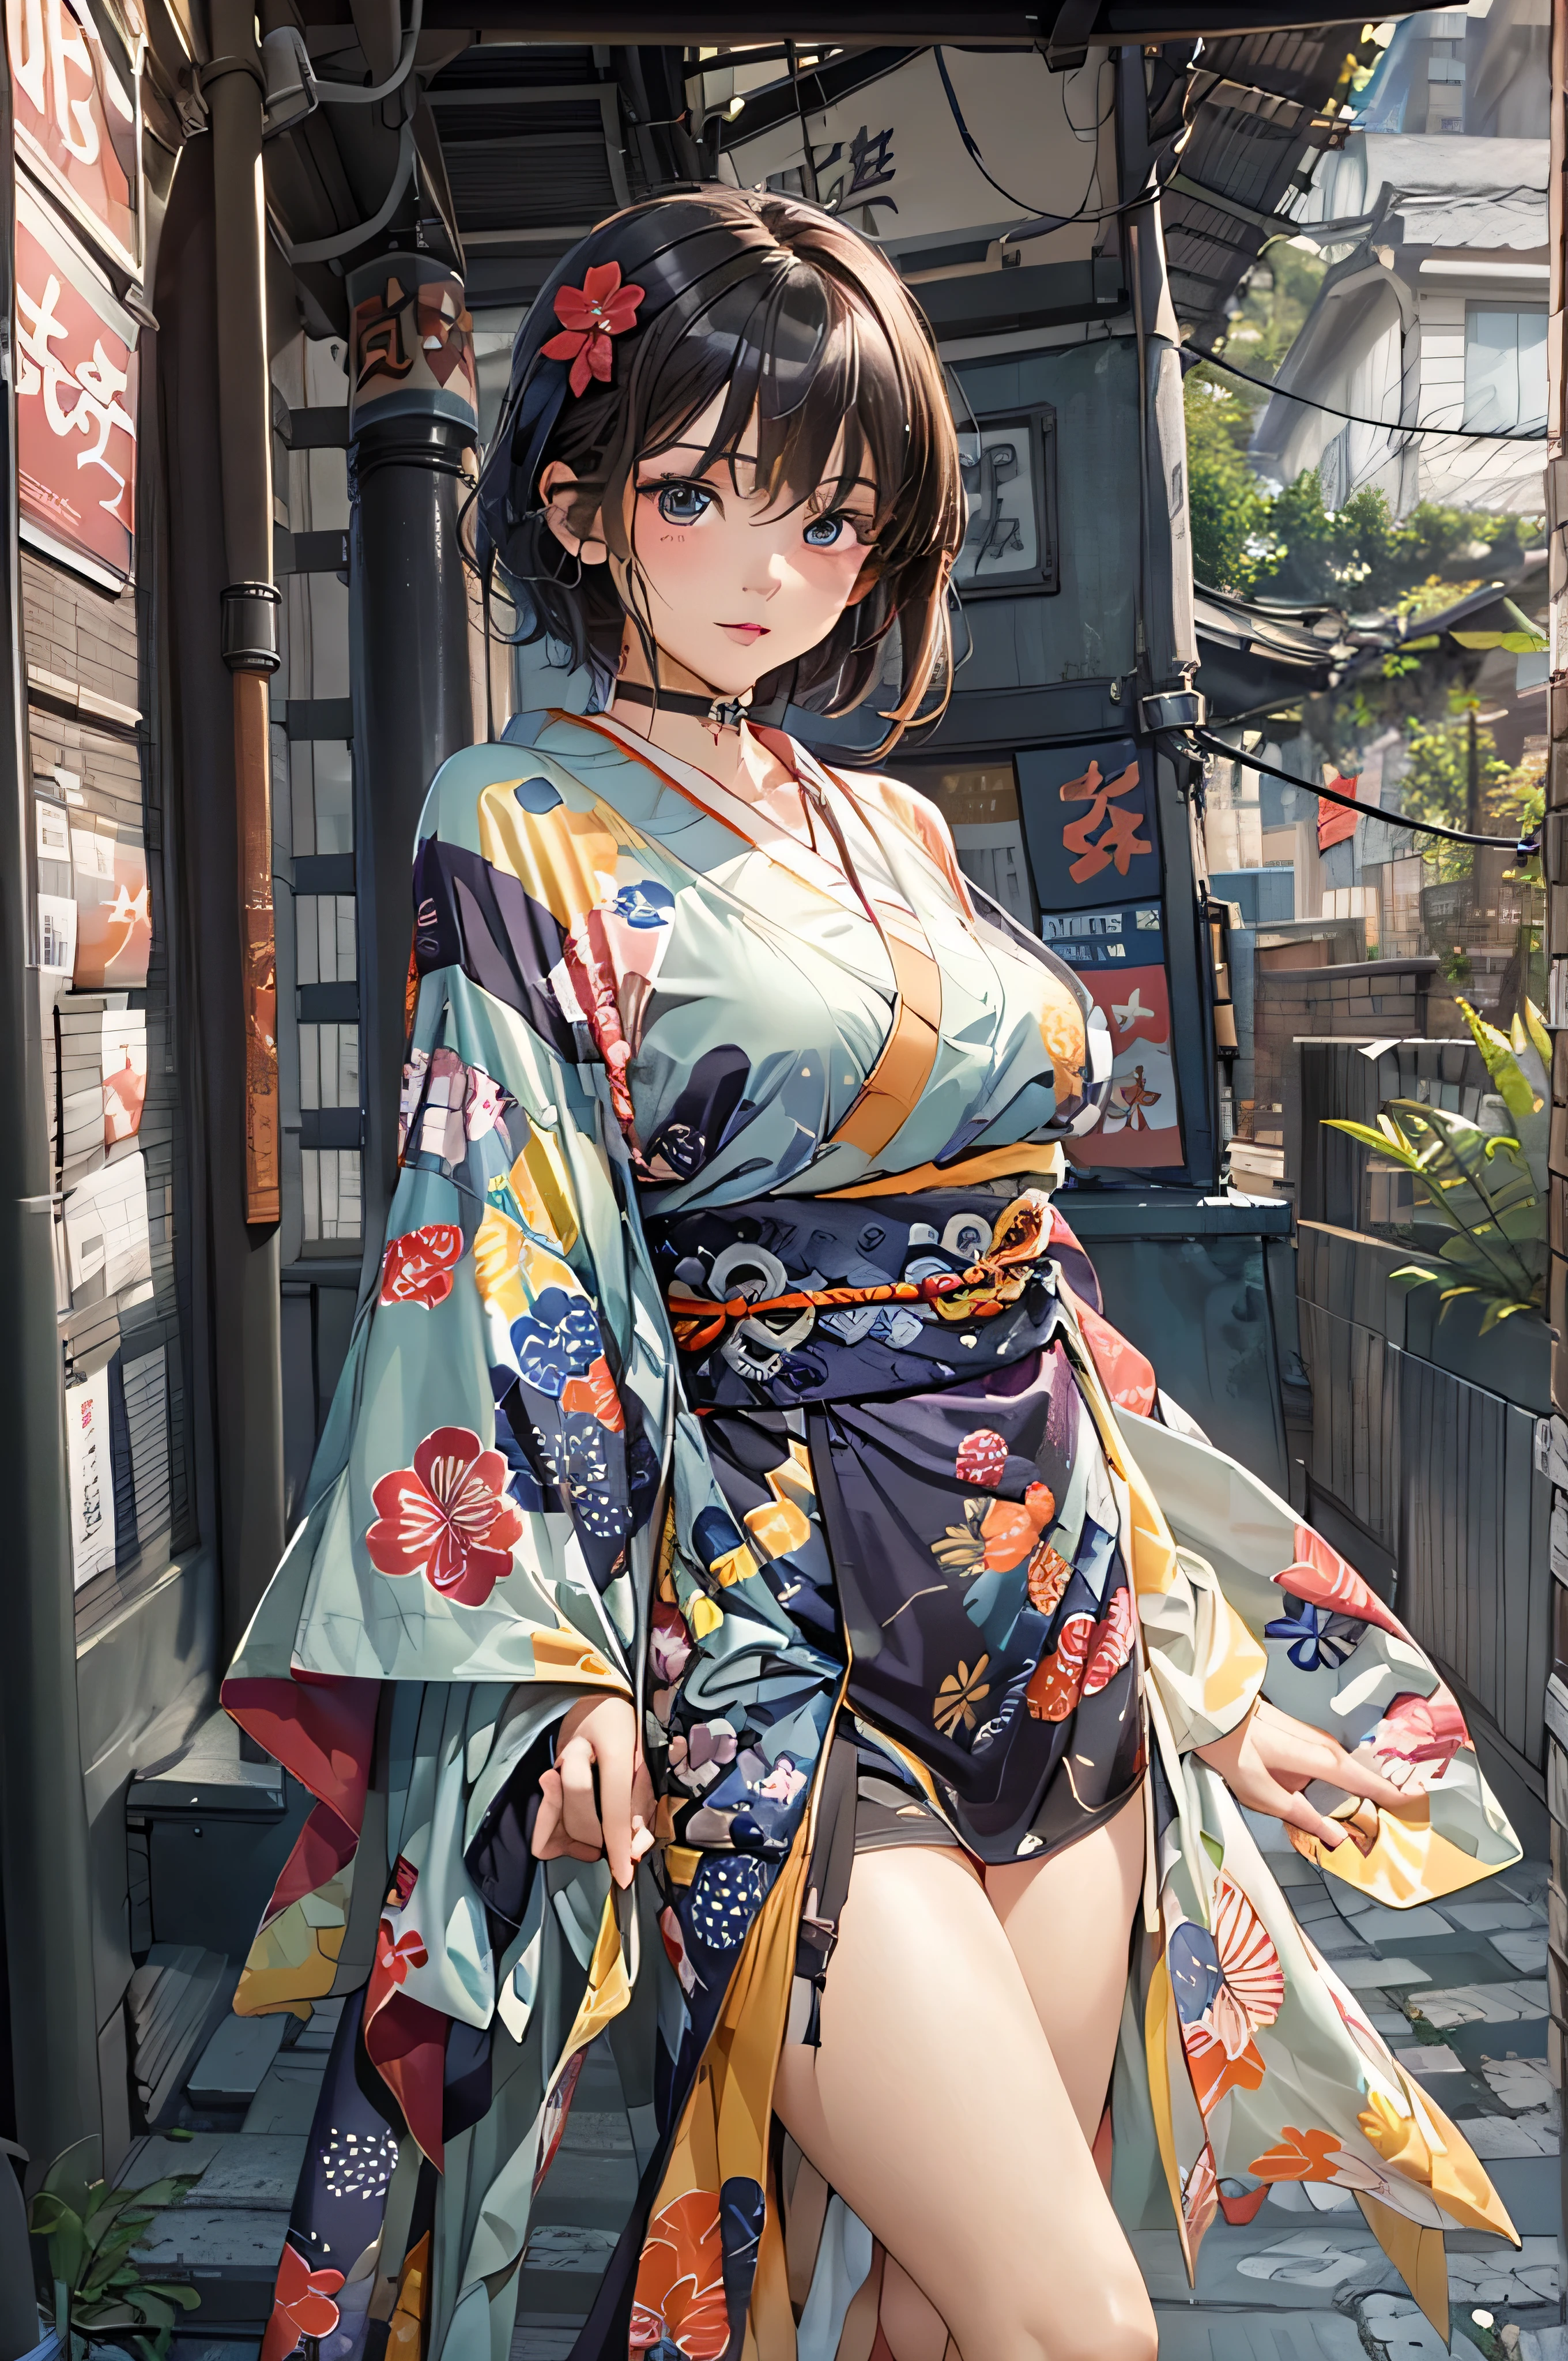 (top-quality,8K picture quality,​masterpiece:1.3,hight resolution,masutepiece:1.2), Front view:0.8,full body Esbian:1.2, Looking at Viewer, 23-year-old woman, Looking at the camera,(Japanese dress, Kimono:1.4,Komono:1.2, a choker:1.4),(Shorthair:1.2,A dark-haired,Beautiful hair), (Back alley:1.3), Kimono comes off,thigh visible,I can see panties,Beautiful face,Cinematic,(Young gravure idols, Young skinny gravure idol, sophisticated gravure idol),(detailed flawless face),normal hands:1.5,Normal finger:1:5,Normal legs:1.5